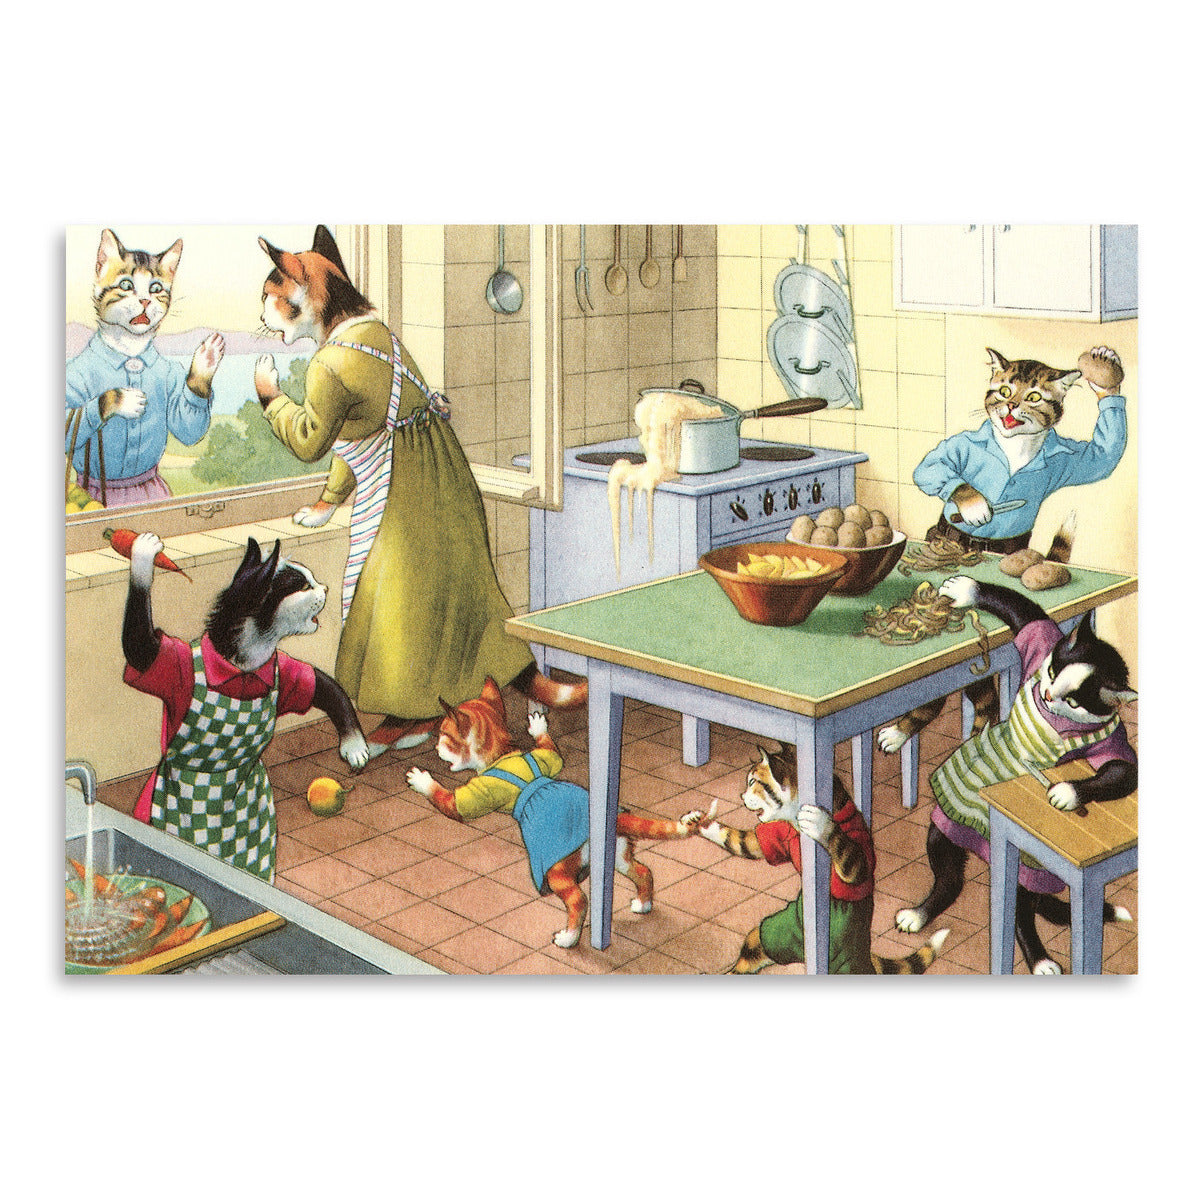 Crazy Cats In The Kitchen by Found Image Press Art Print - Art Print - Americanflat